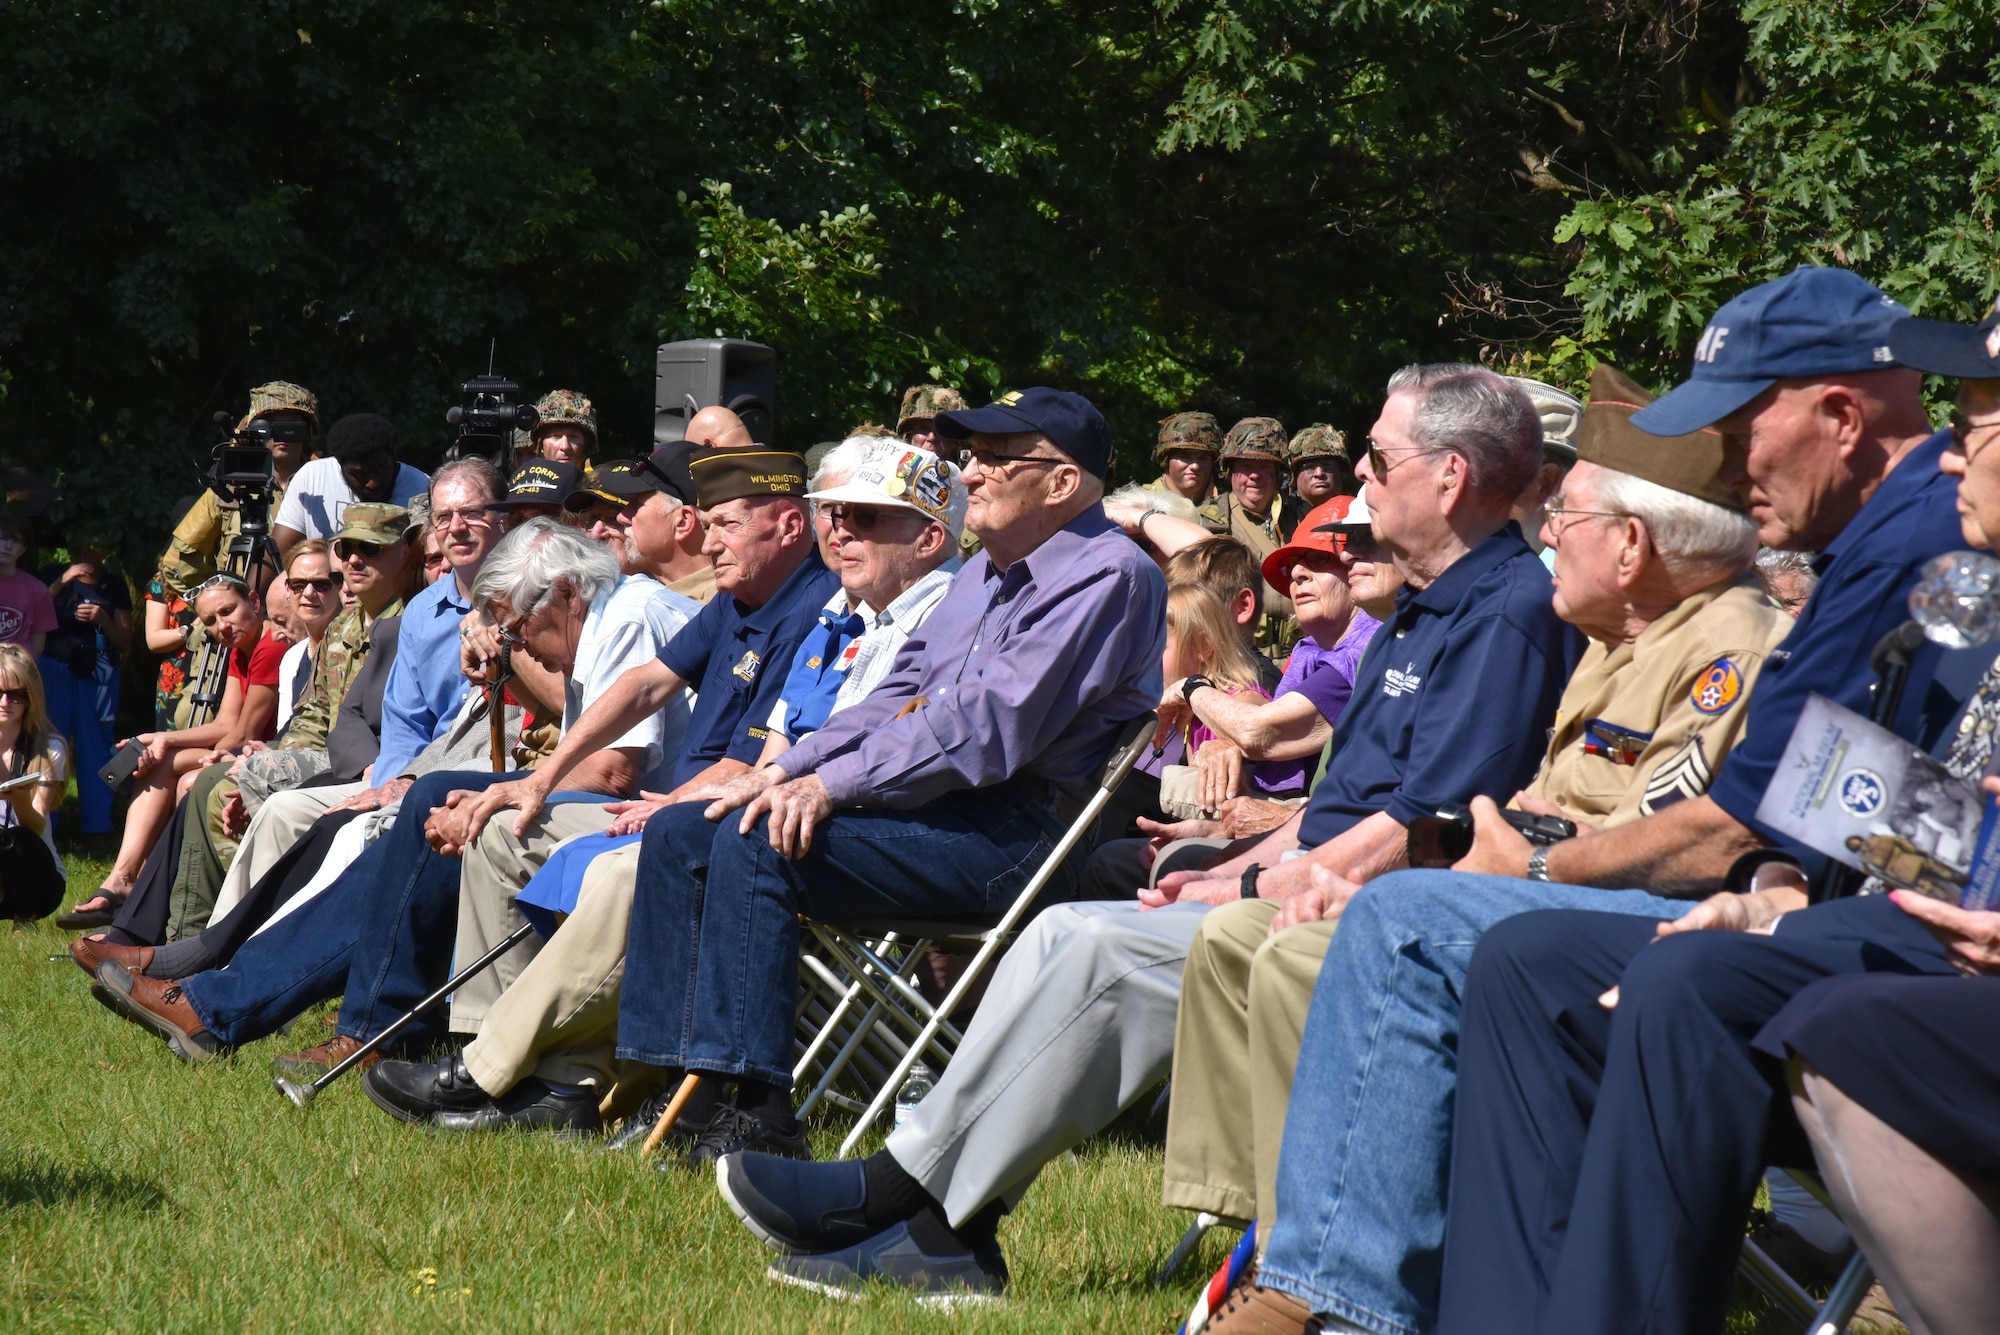 D-Day and World War II veterans are honored during a wreath laying ceremony on June 6 in Memorial Park at the National Museum of the U.S. Air Force, Wright-Patterson Air Force Base. (U.S. Air Force photo/Ken LaRock)